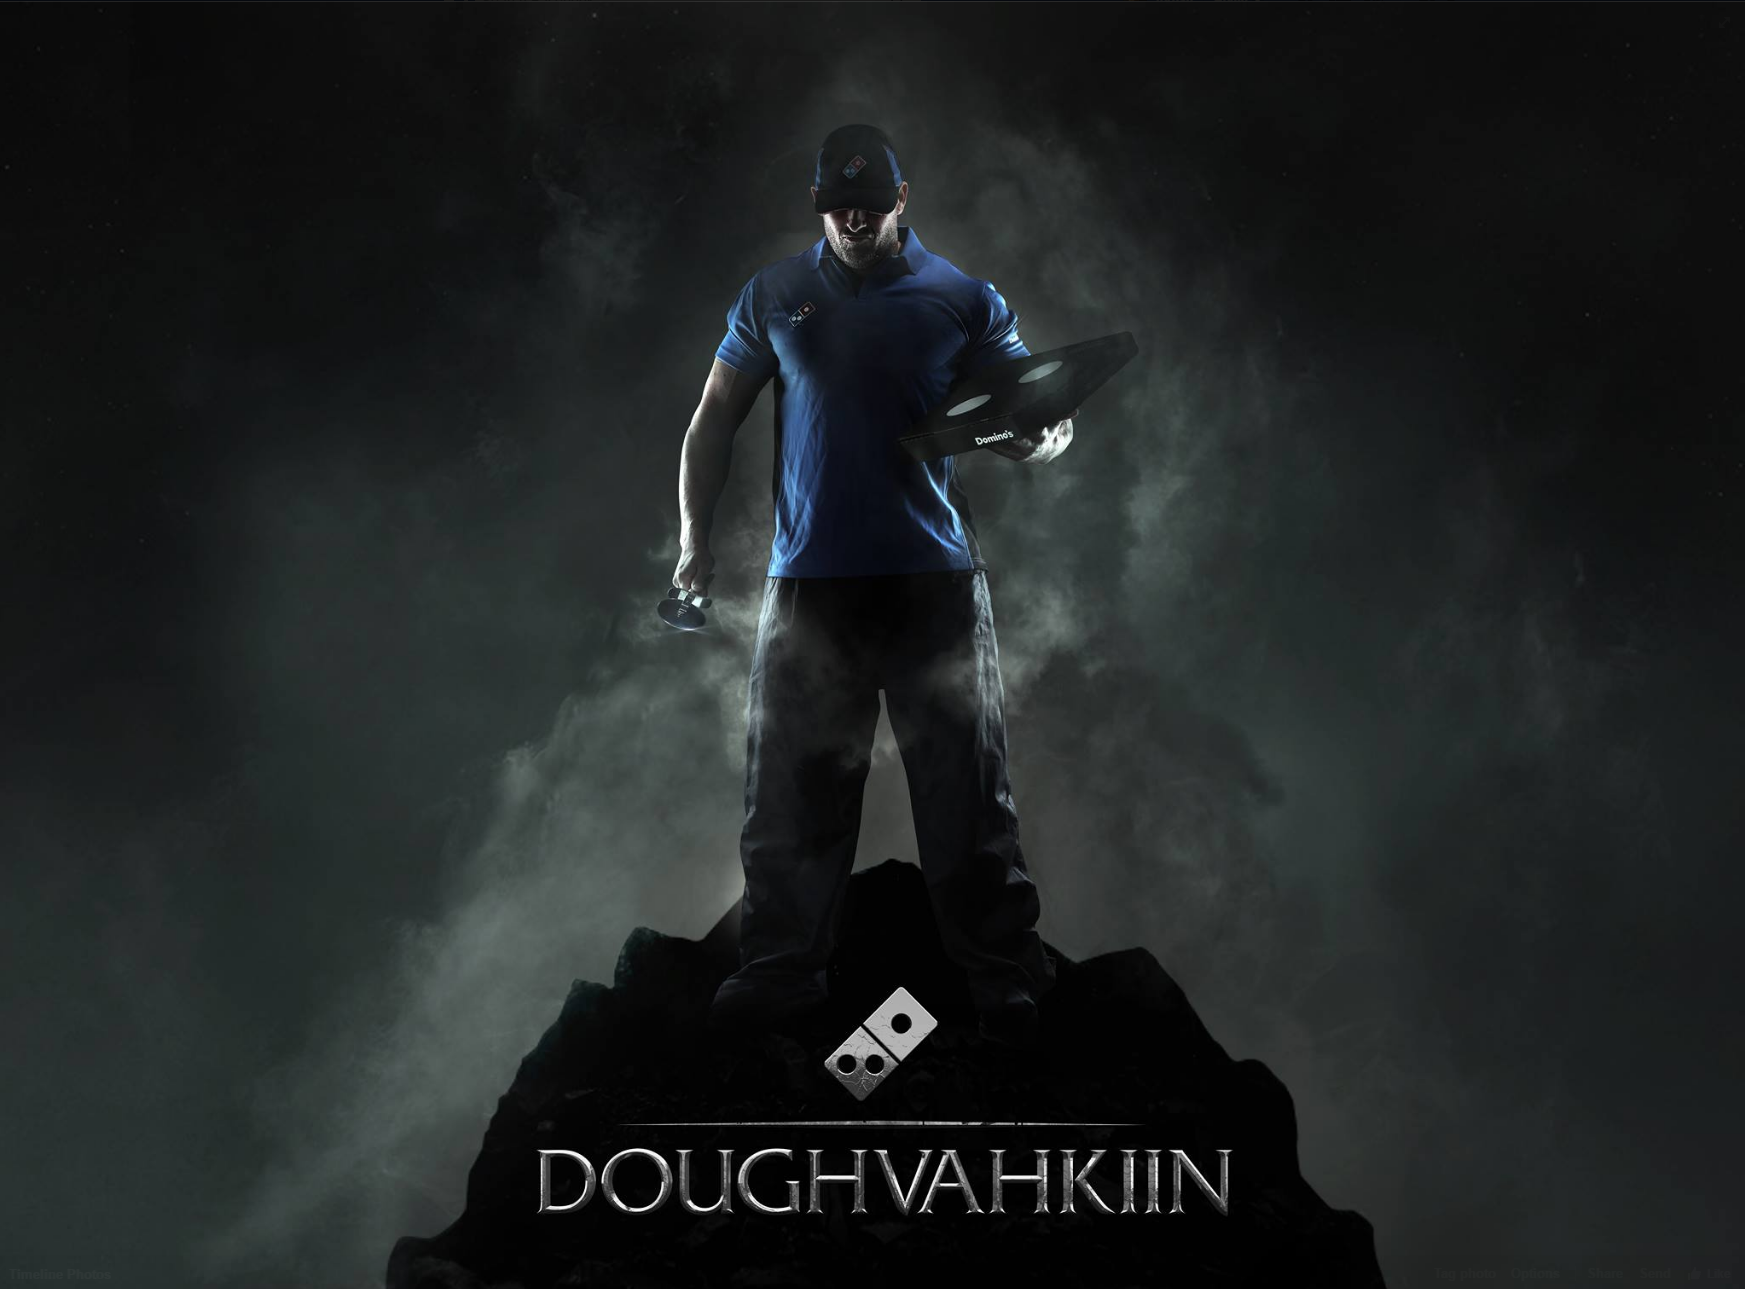 Apparently, Domino's Pizza is doing a Skyrim promotion called "Doughvahkiin"